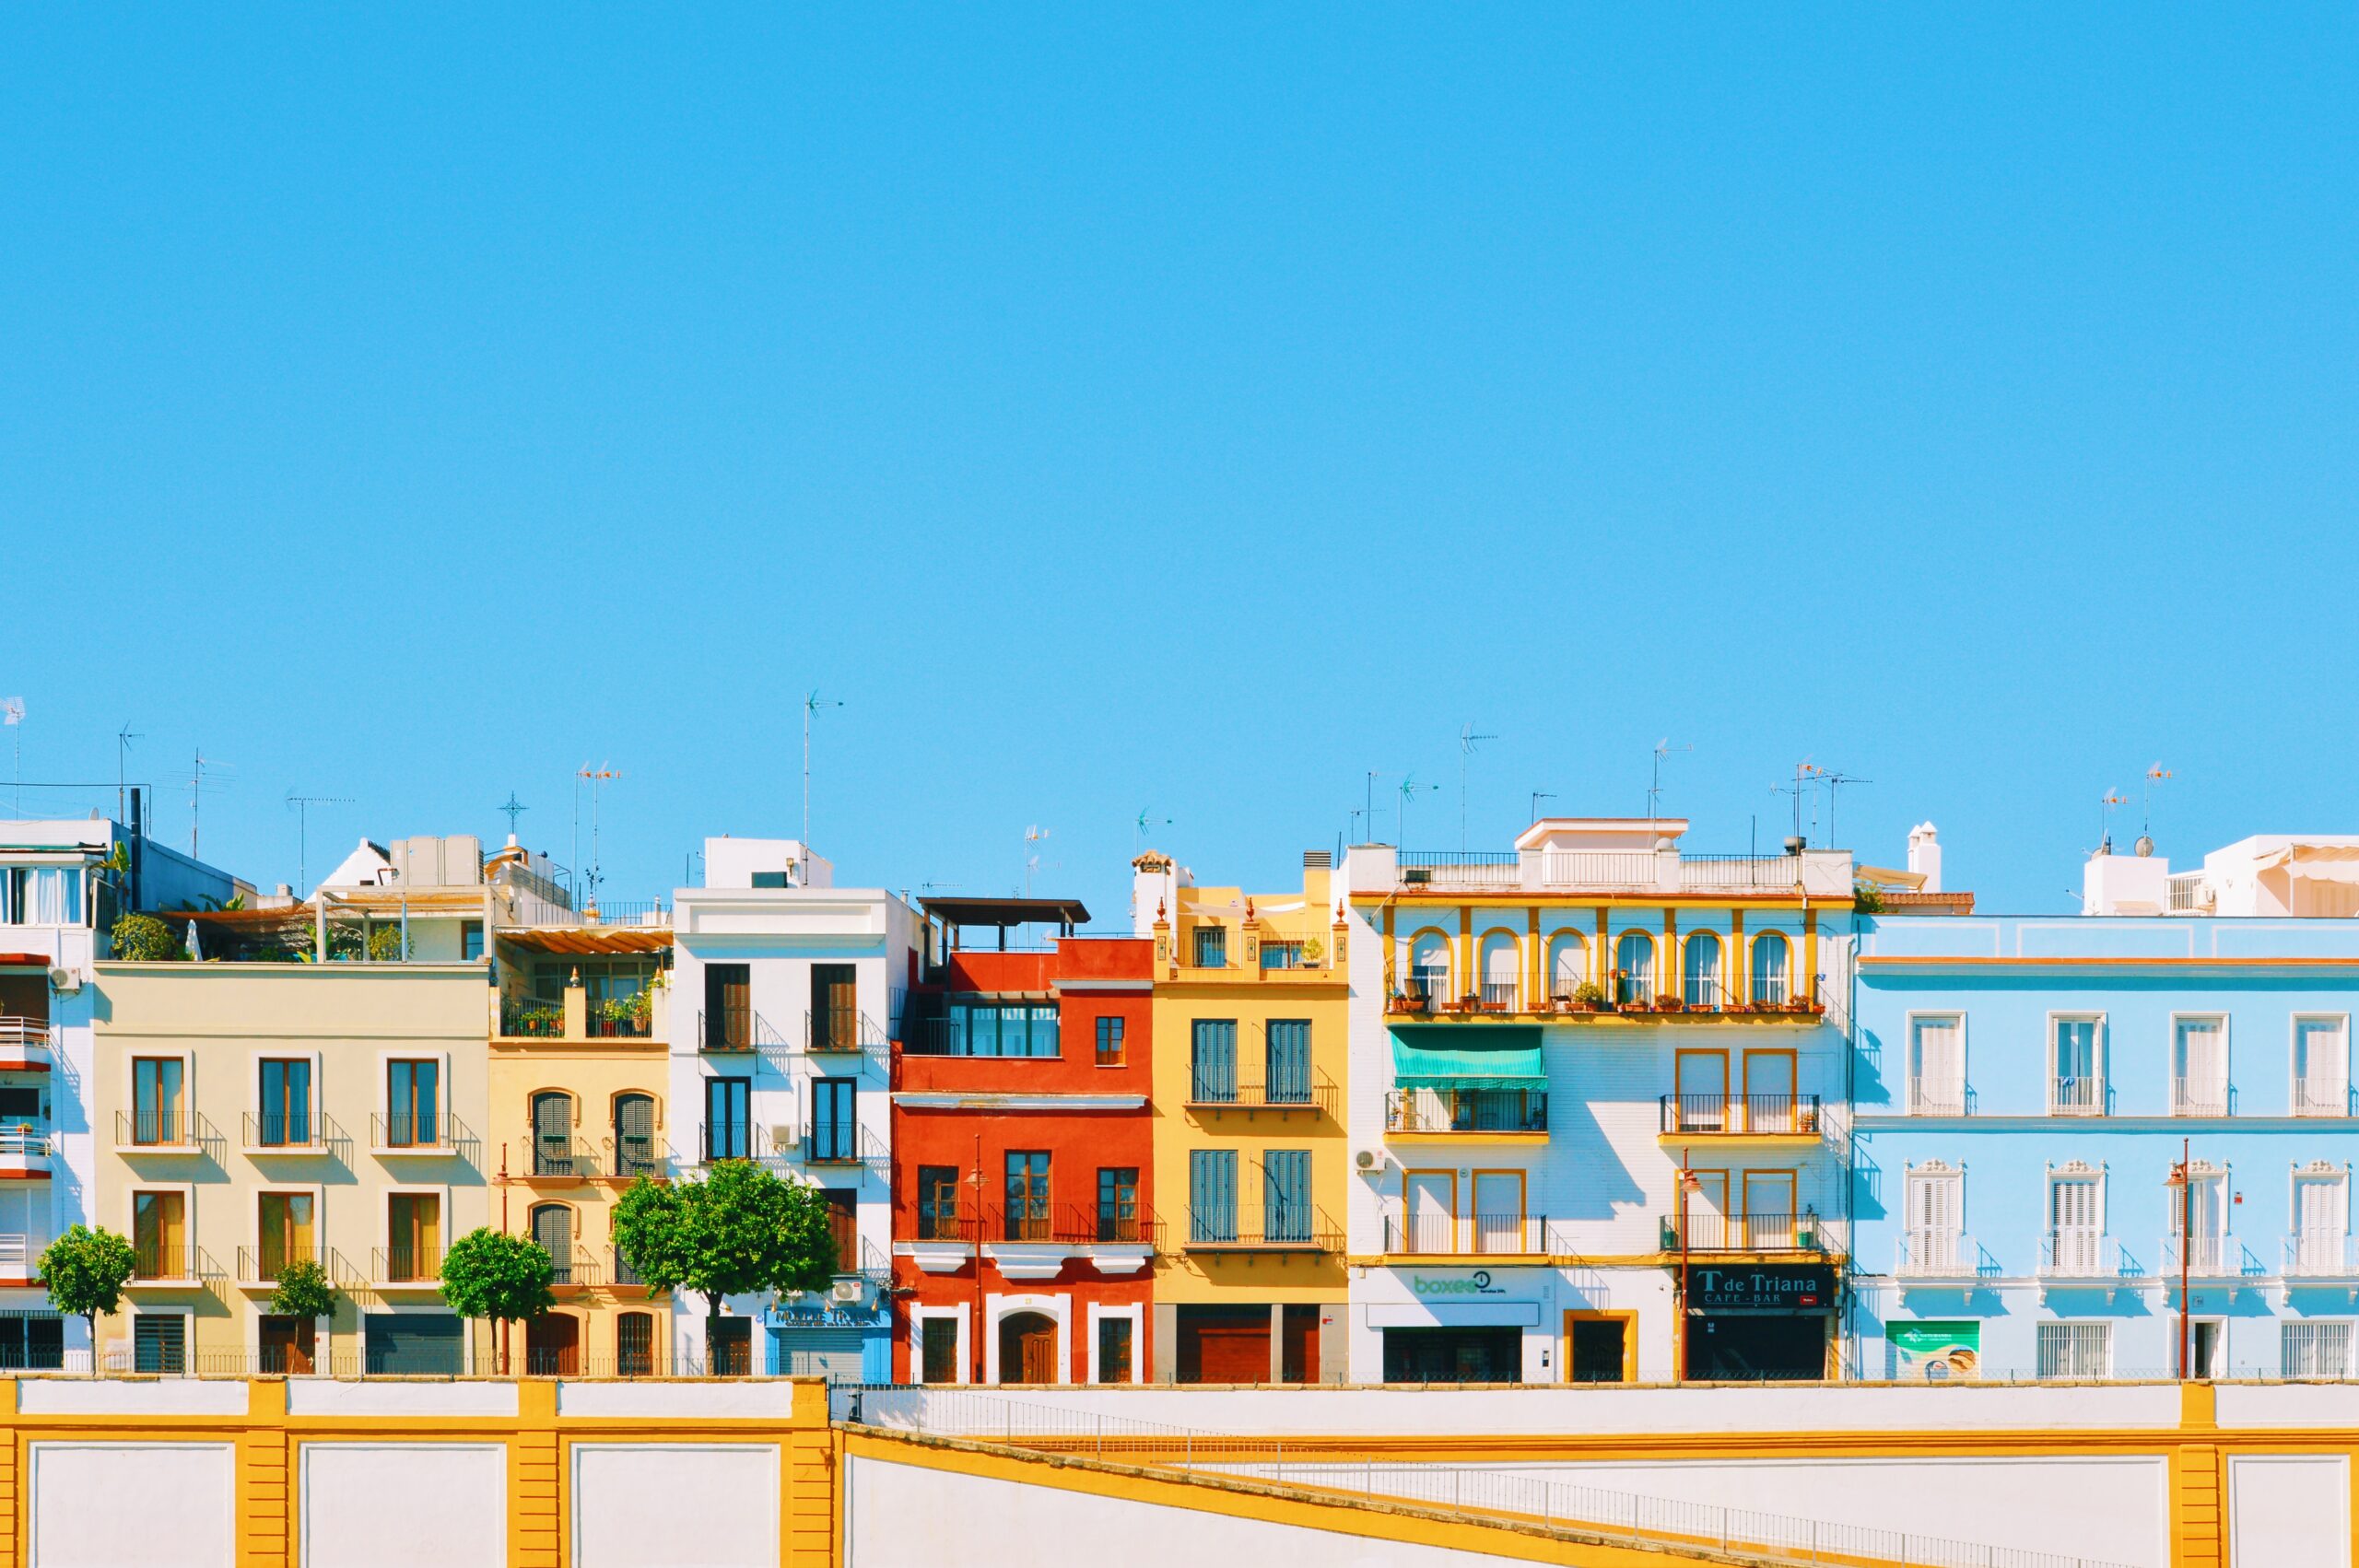 The colorful buildings of Triana and a bright blue sky  